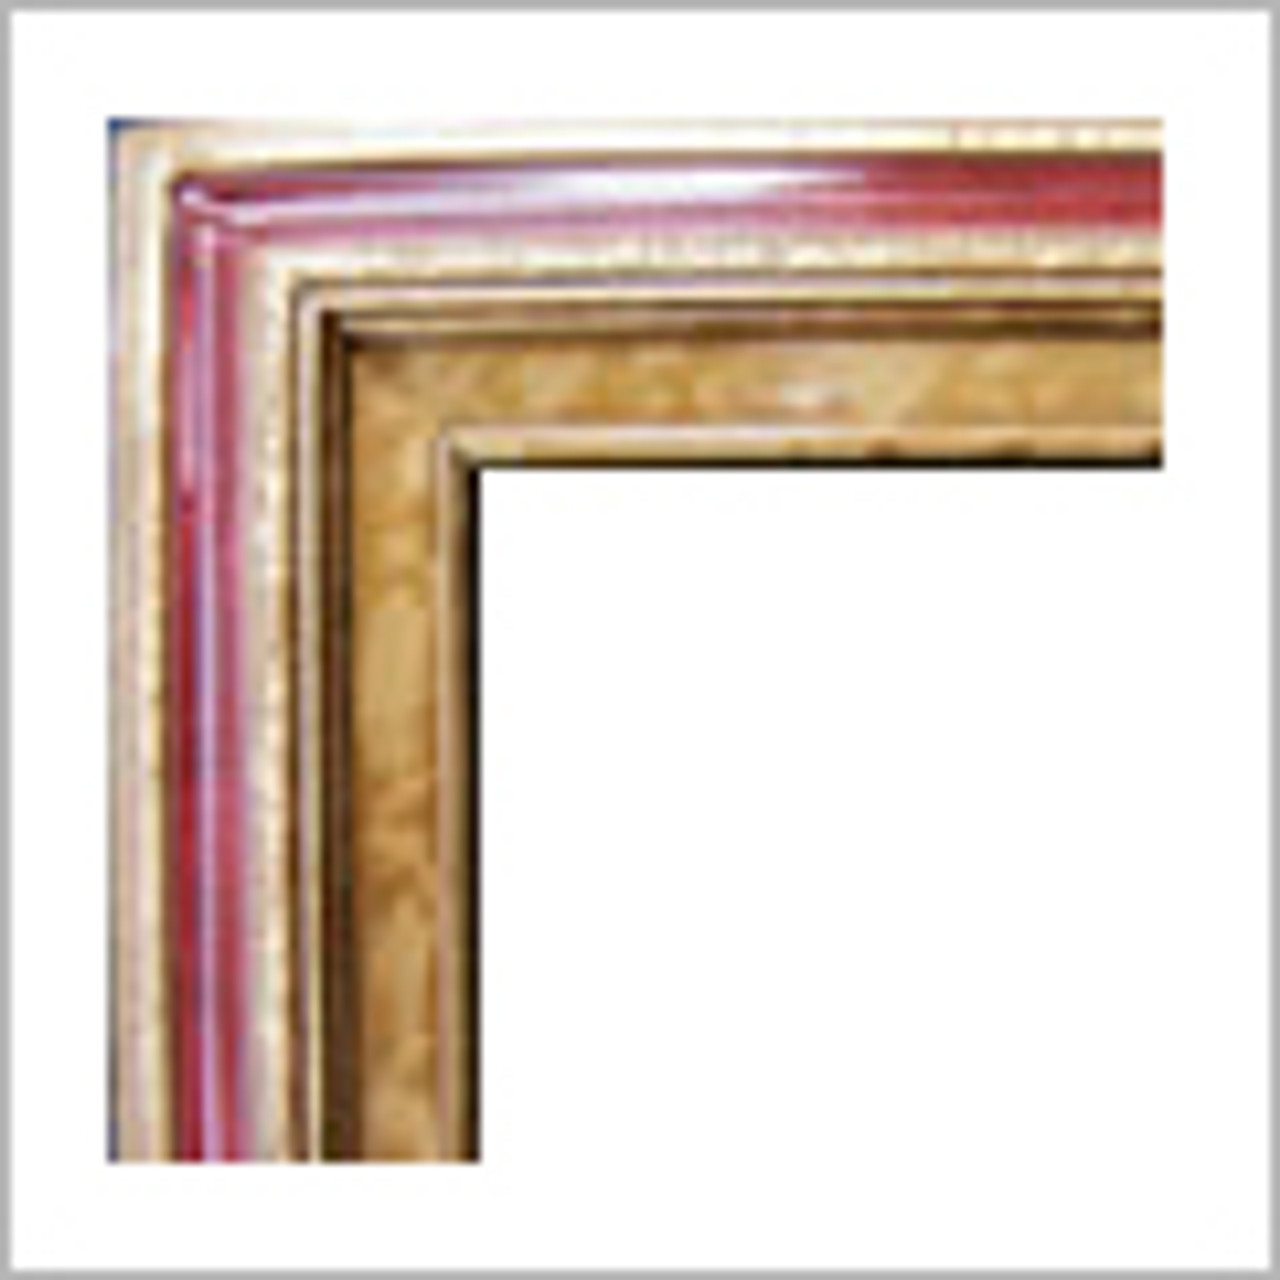 3 Inch Deluxe Wood Frames: 12X20